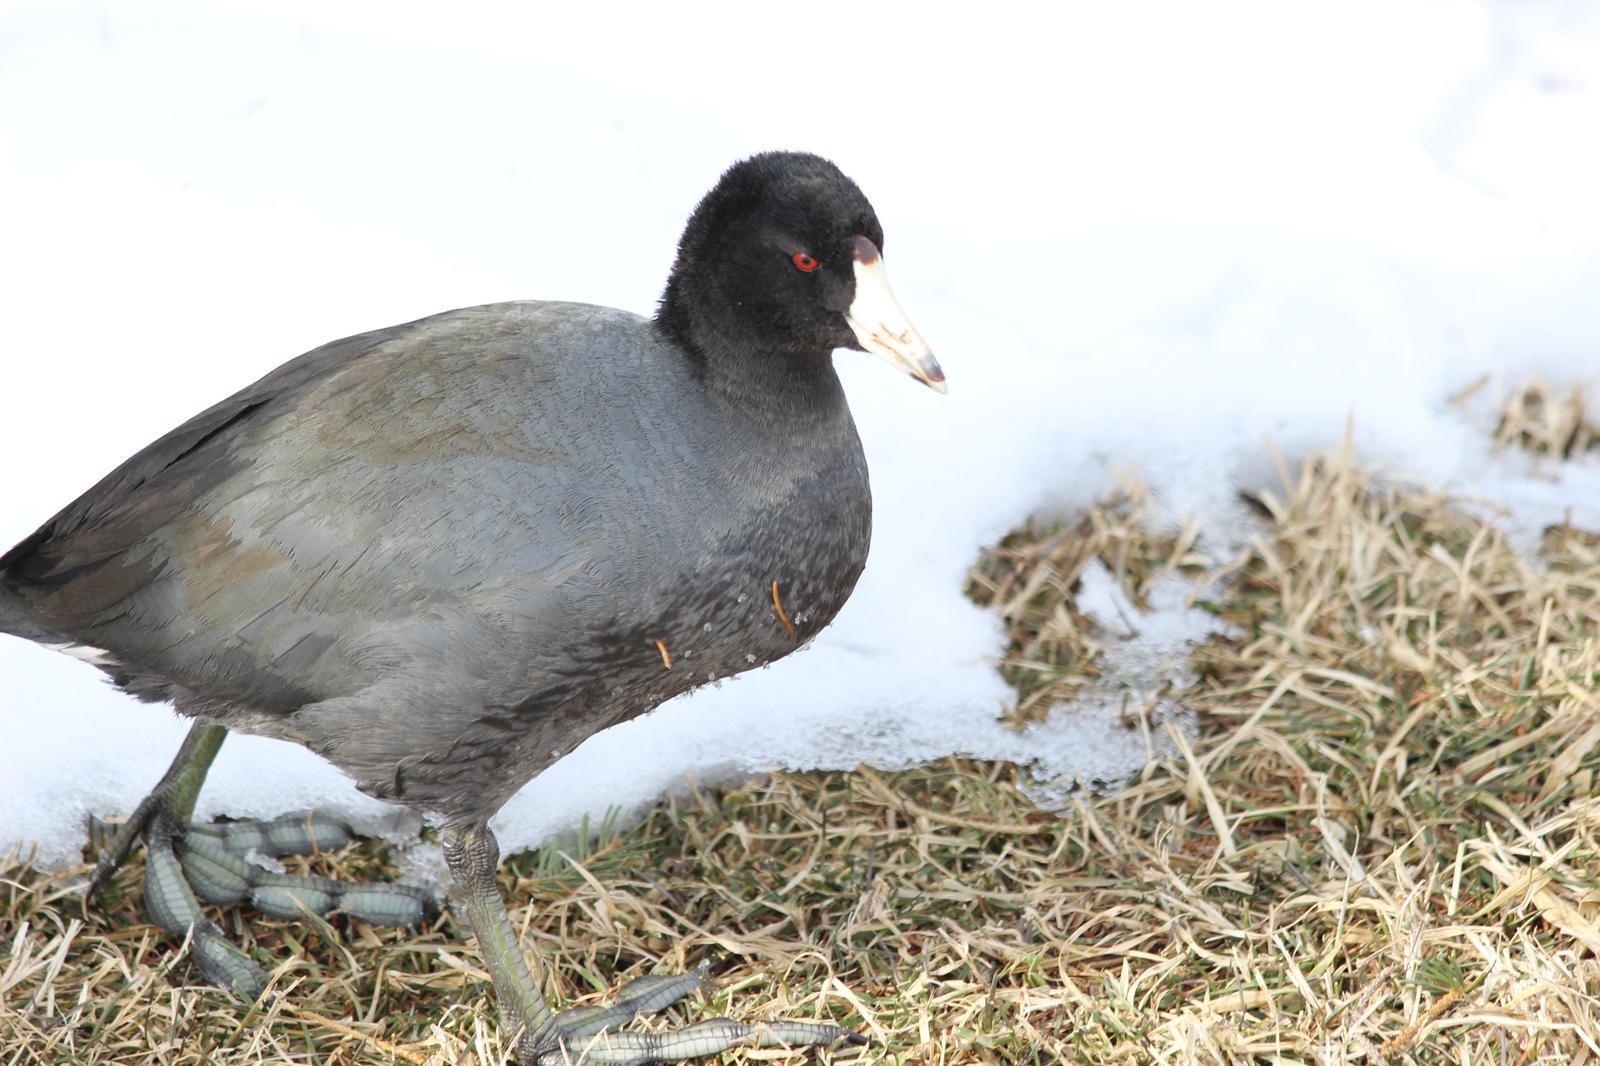 American Coot Photo by Darrin Menzo